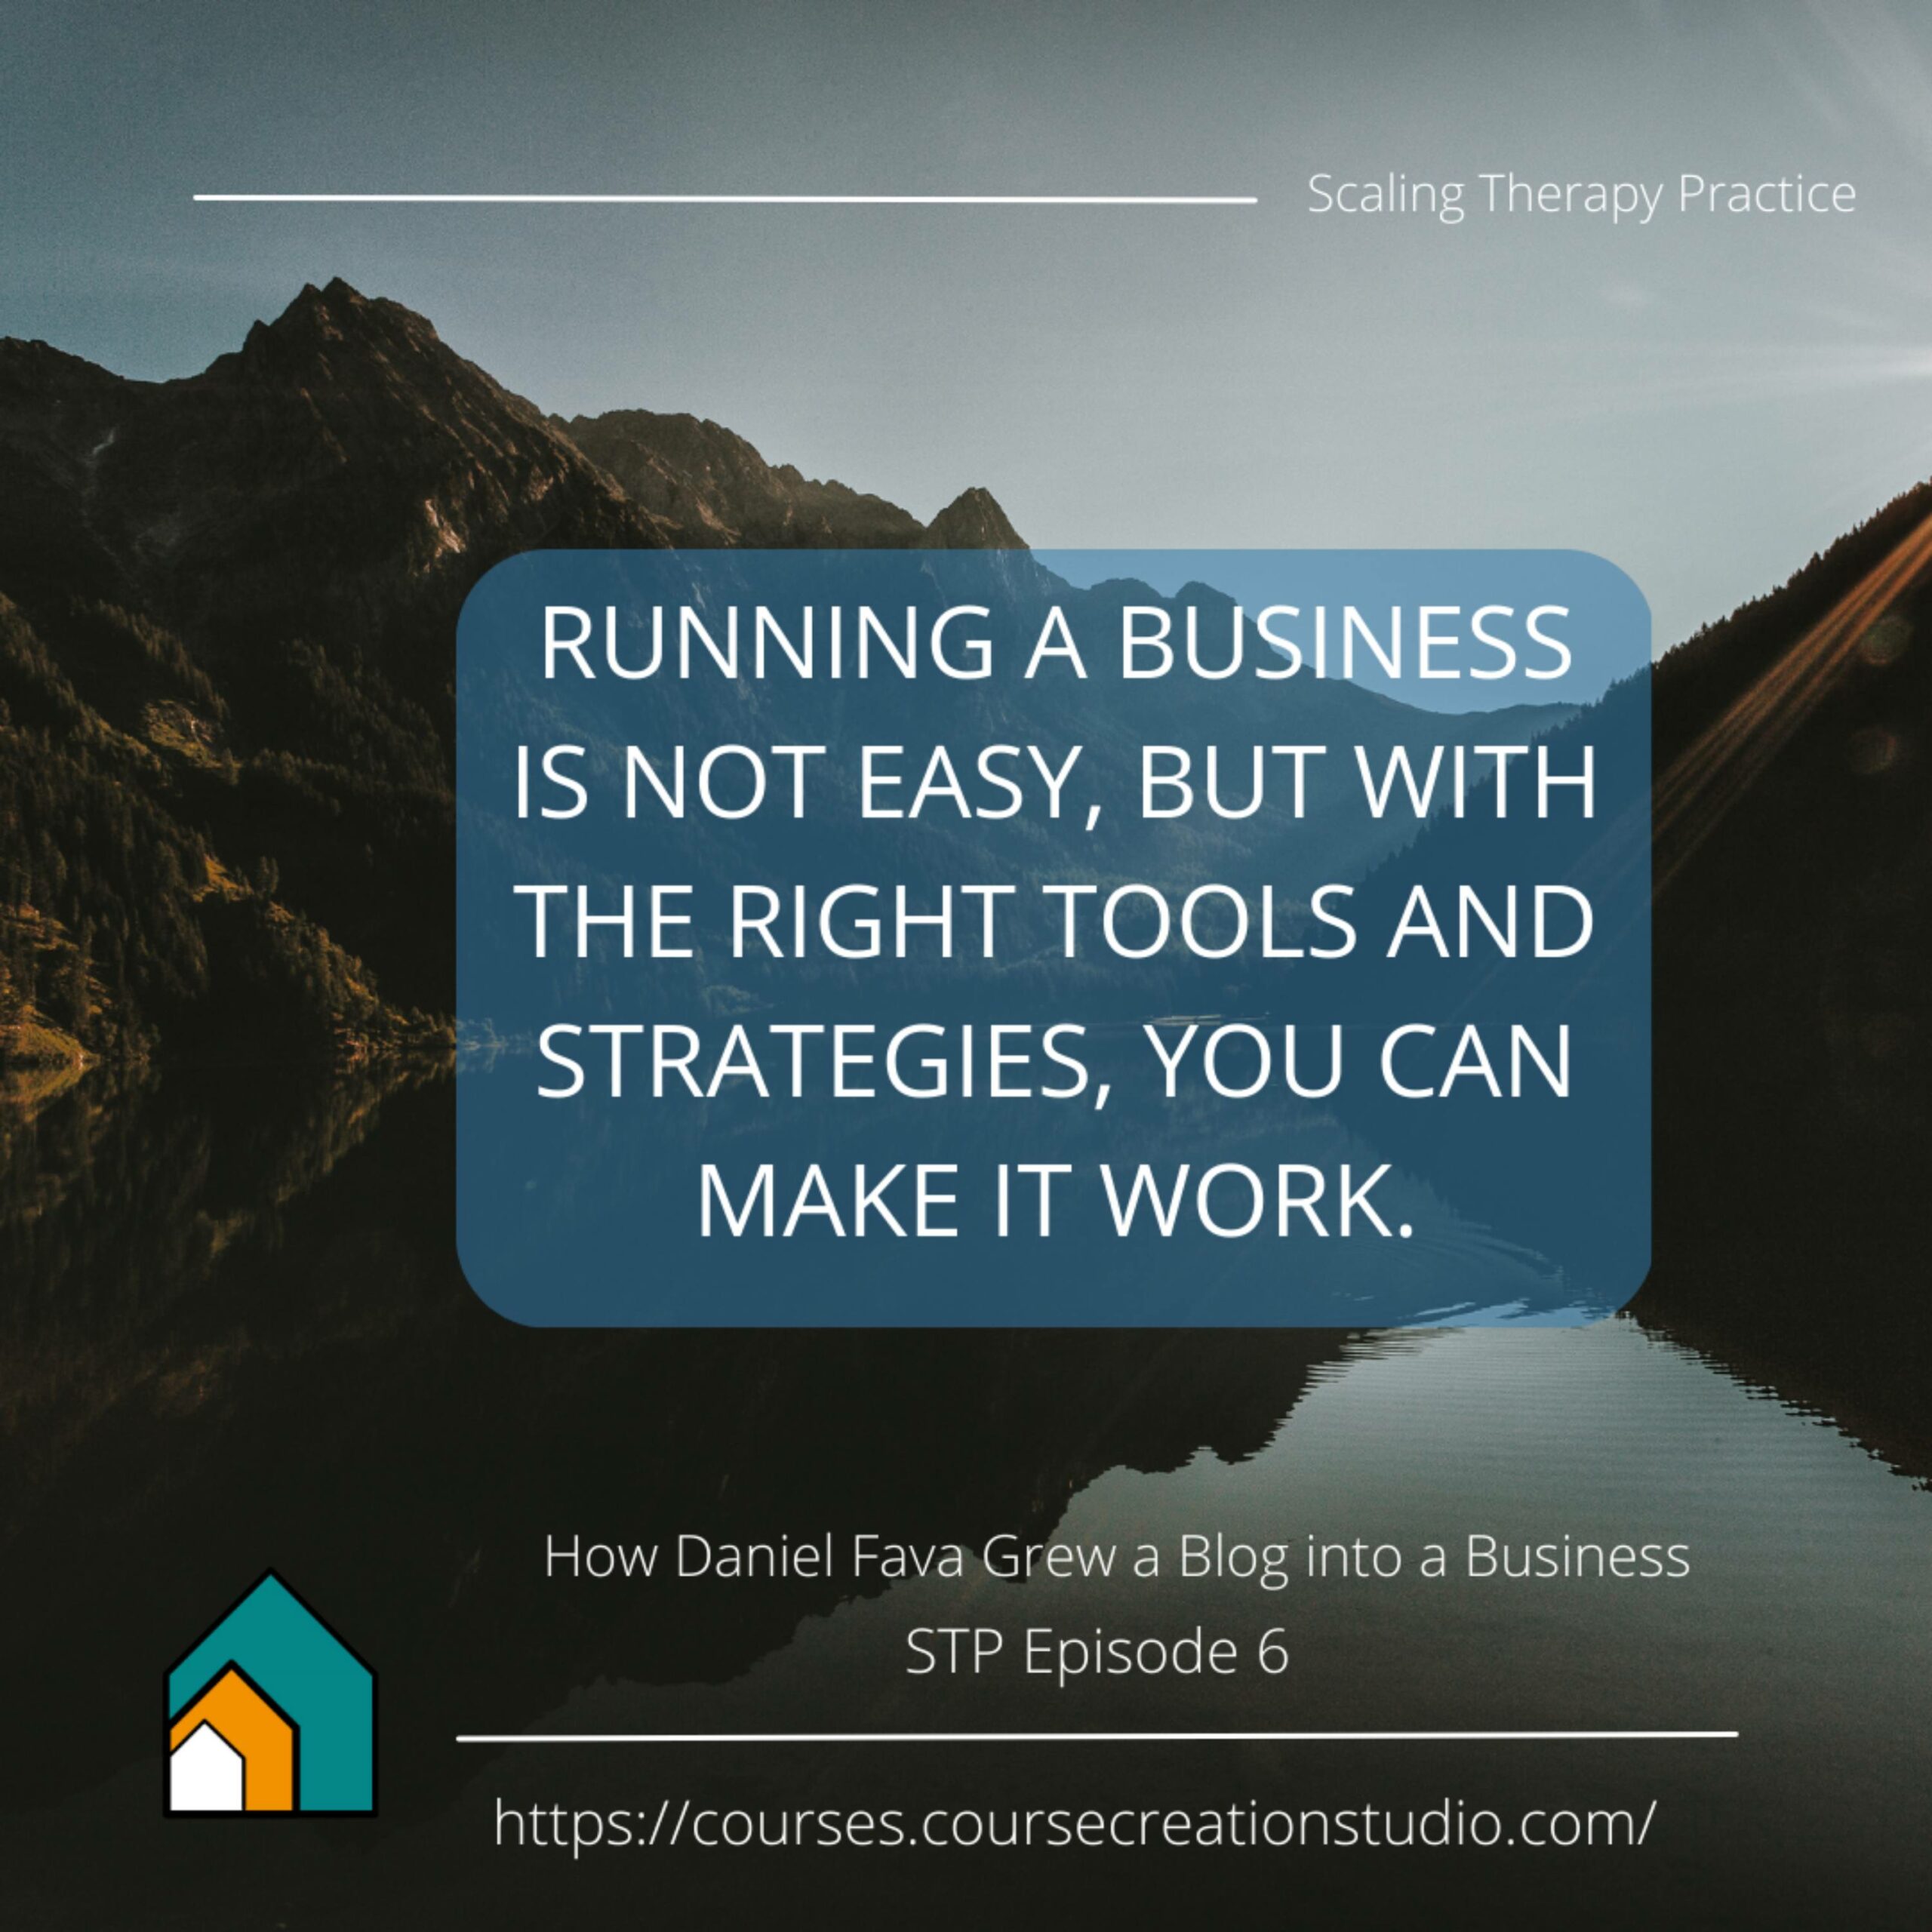 How Daniel Fava Grew a Blog into a Business that Helps Therapists Attract More Clients